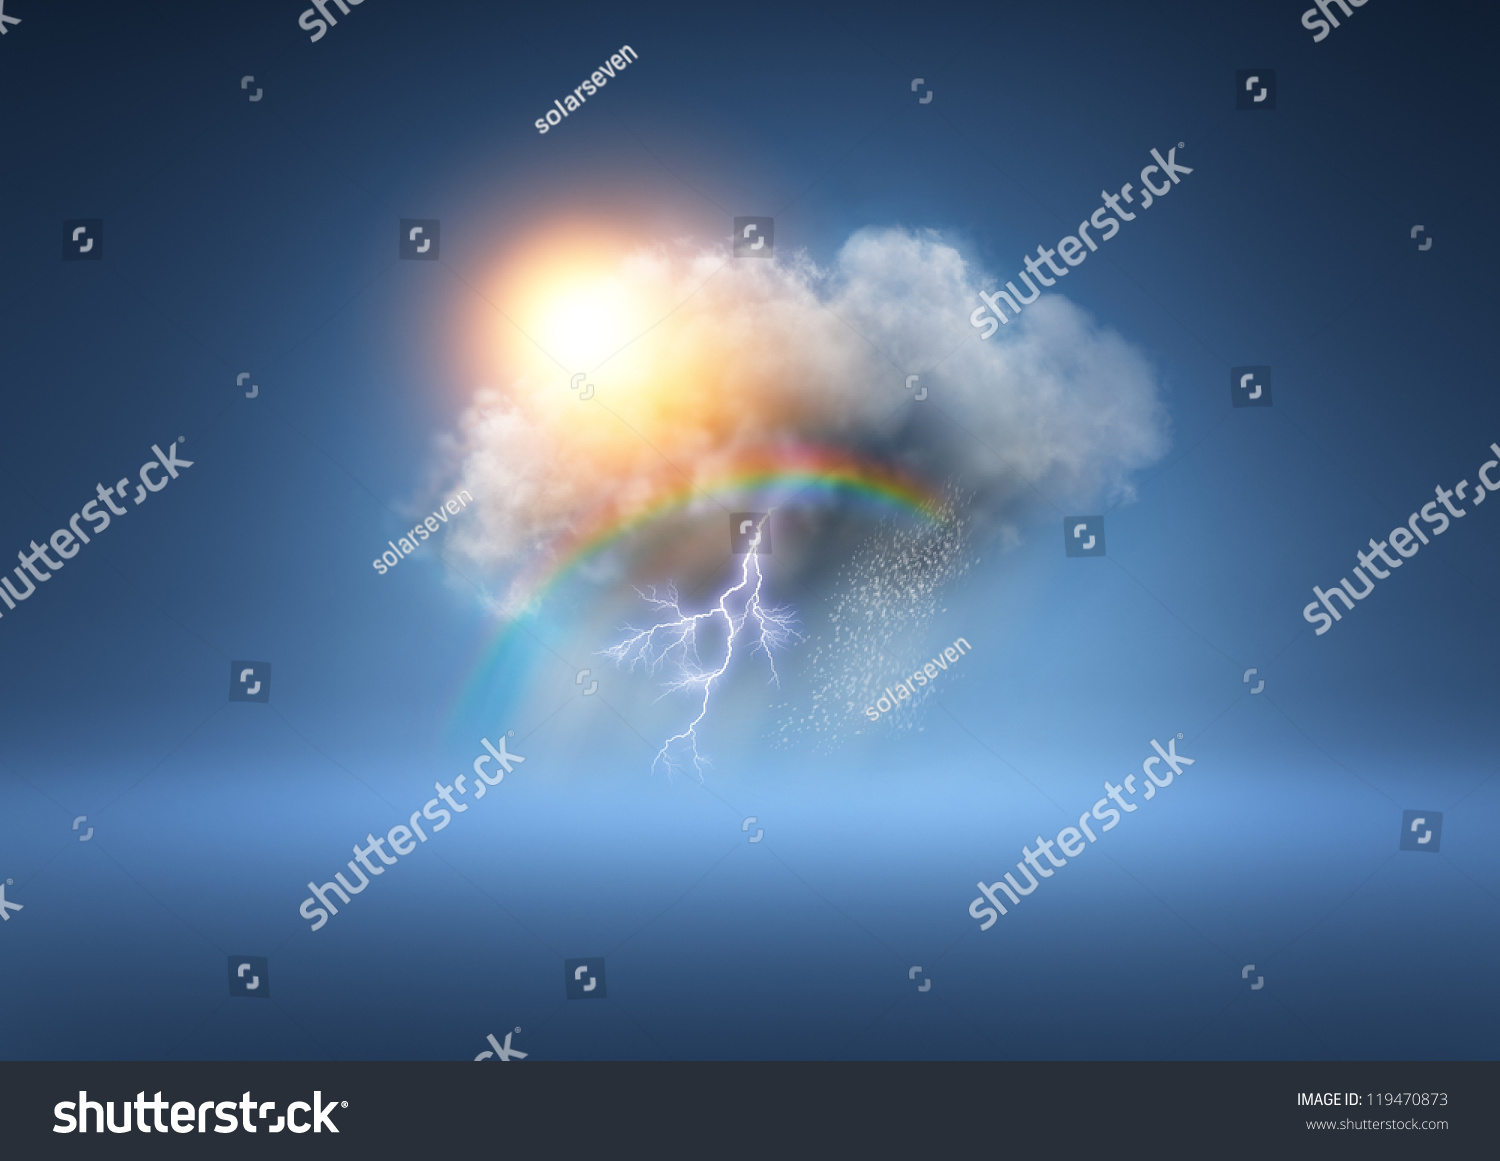 All Weather Cloud - A cloud with lots of weather elements! #119470873